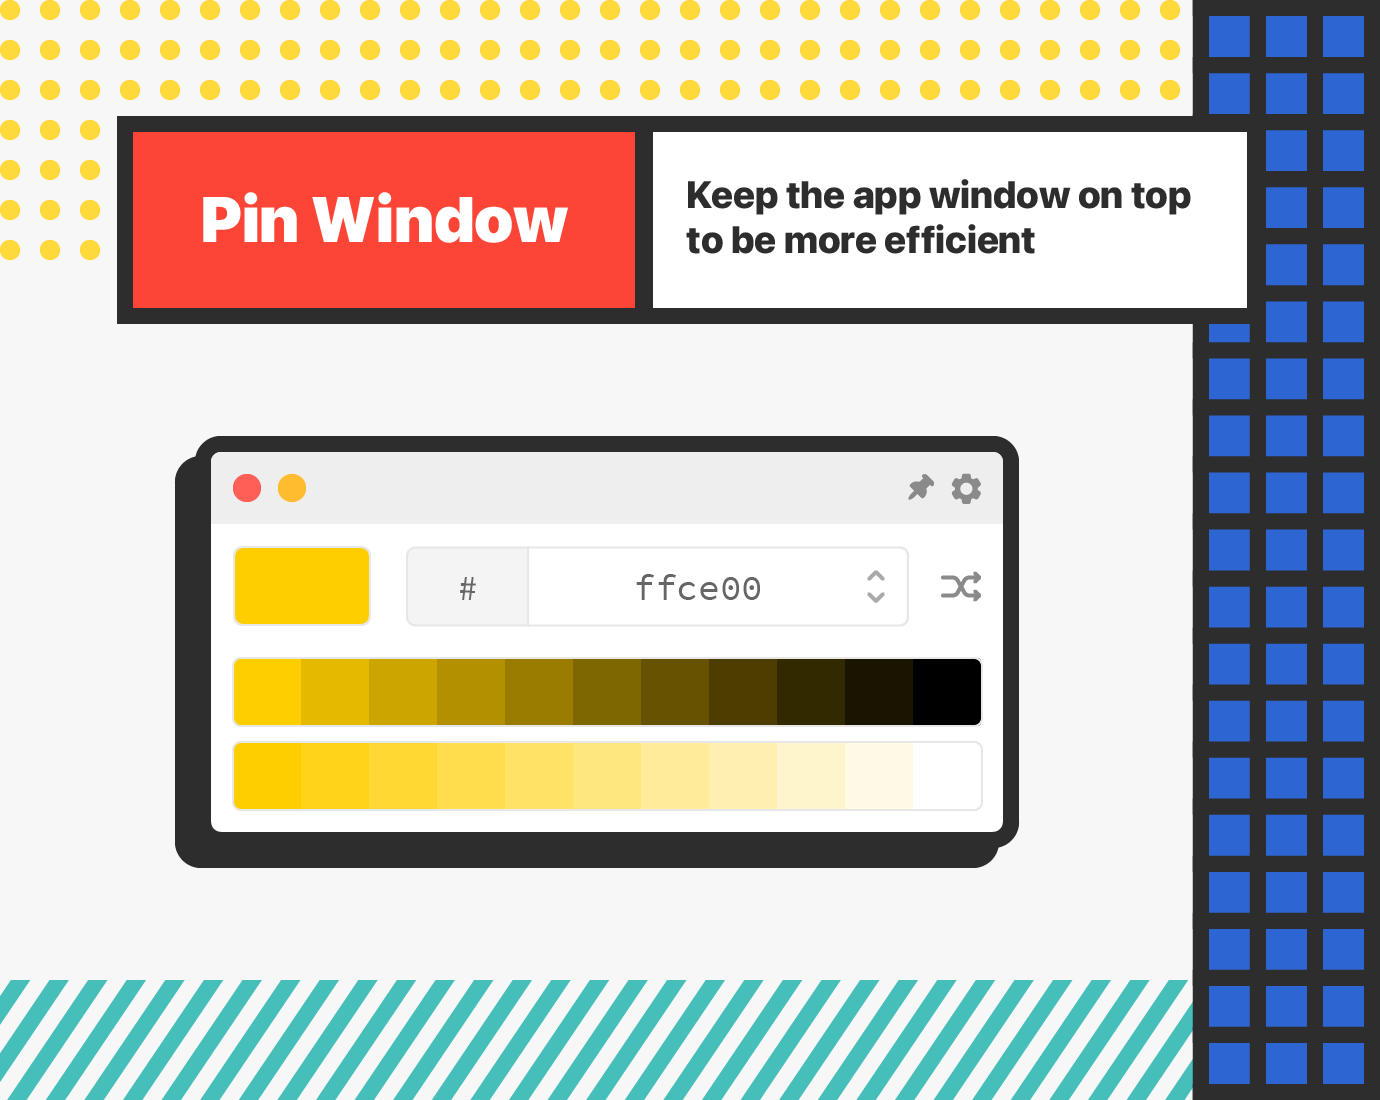 Feature 1 - Pin Window: Keep the app window on top to be more efficient